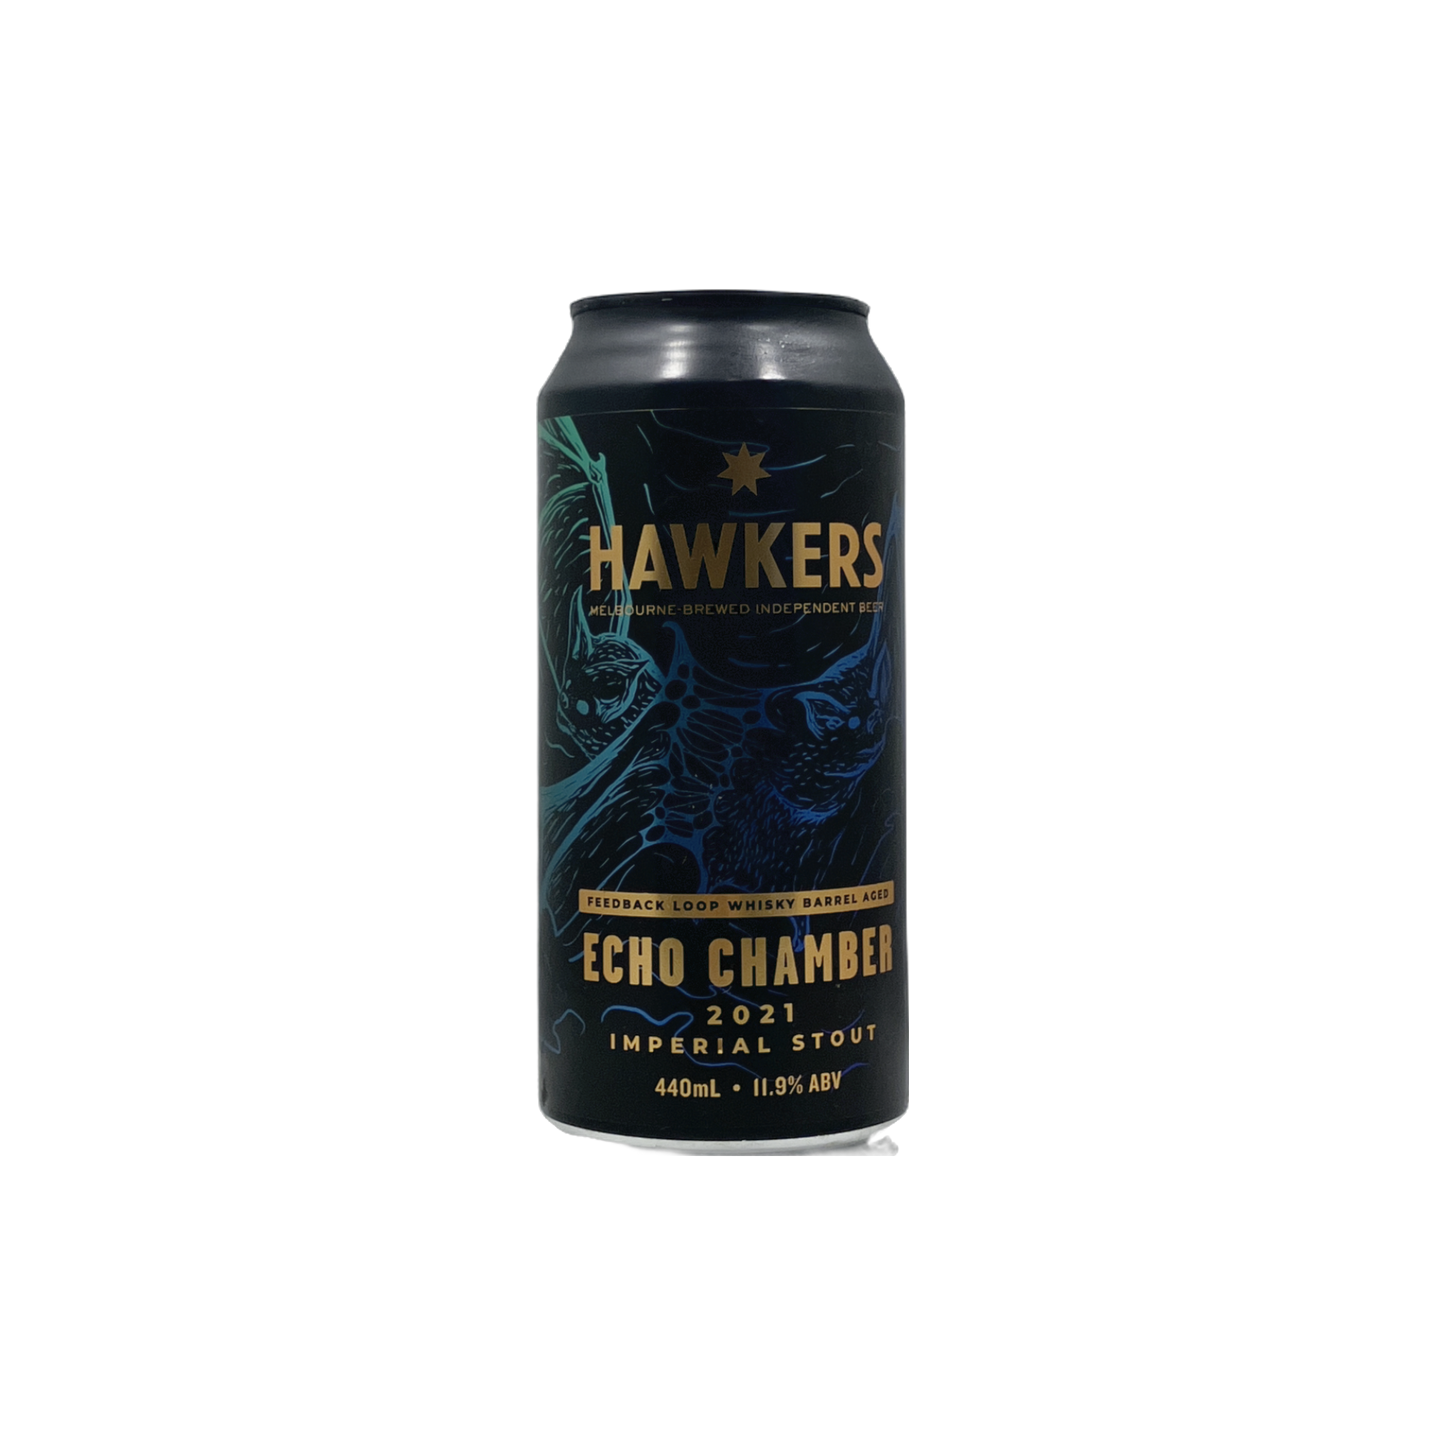 Hawkers Echo Chamber Feedback Loop Whisky Barrel Aged Imperial Stout 2021 440ml